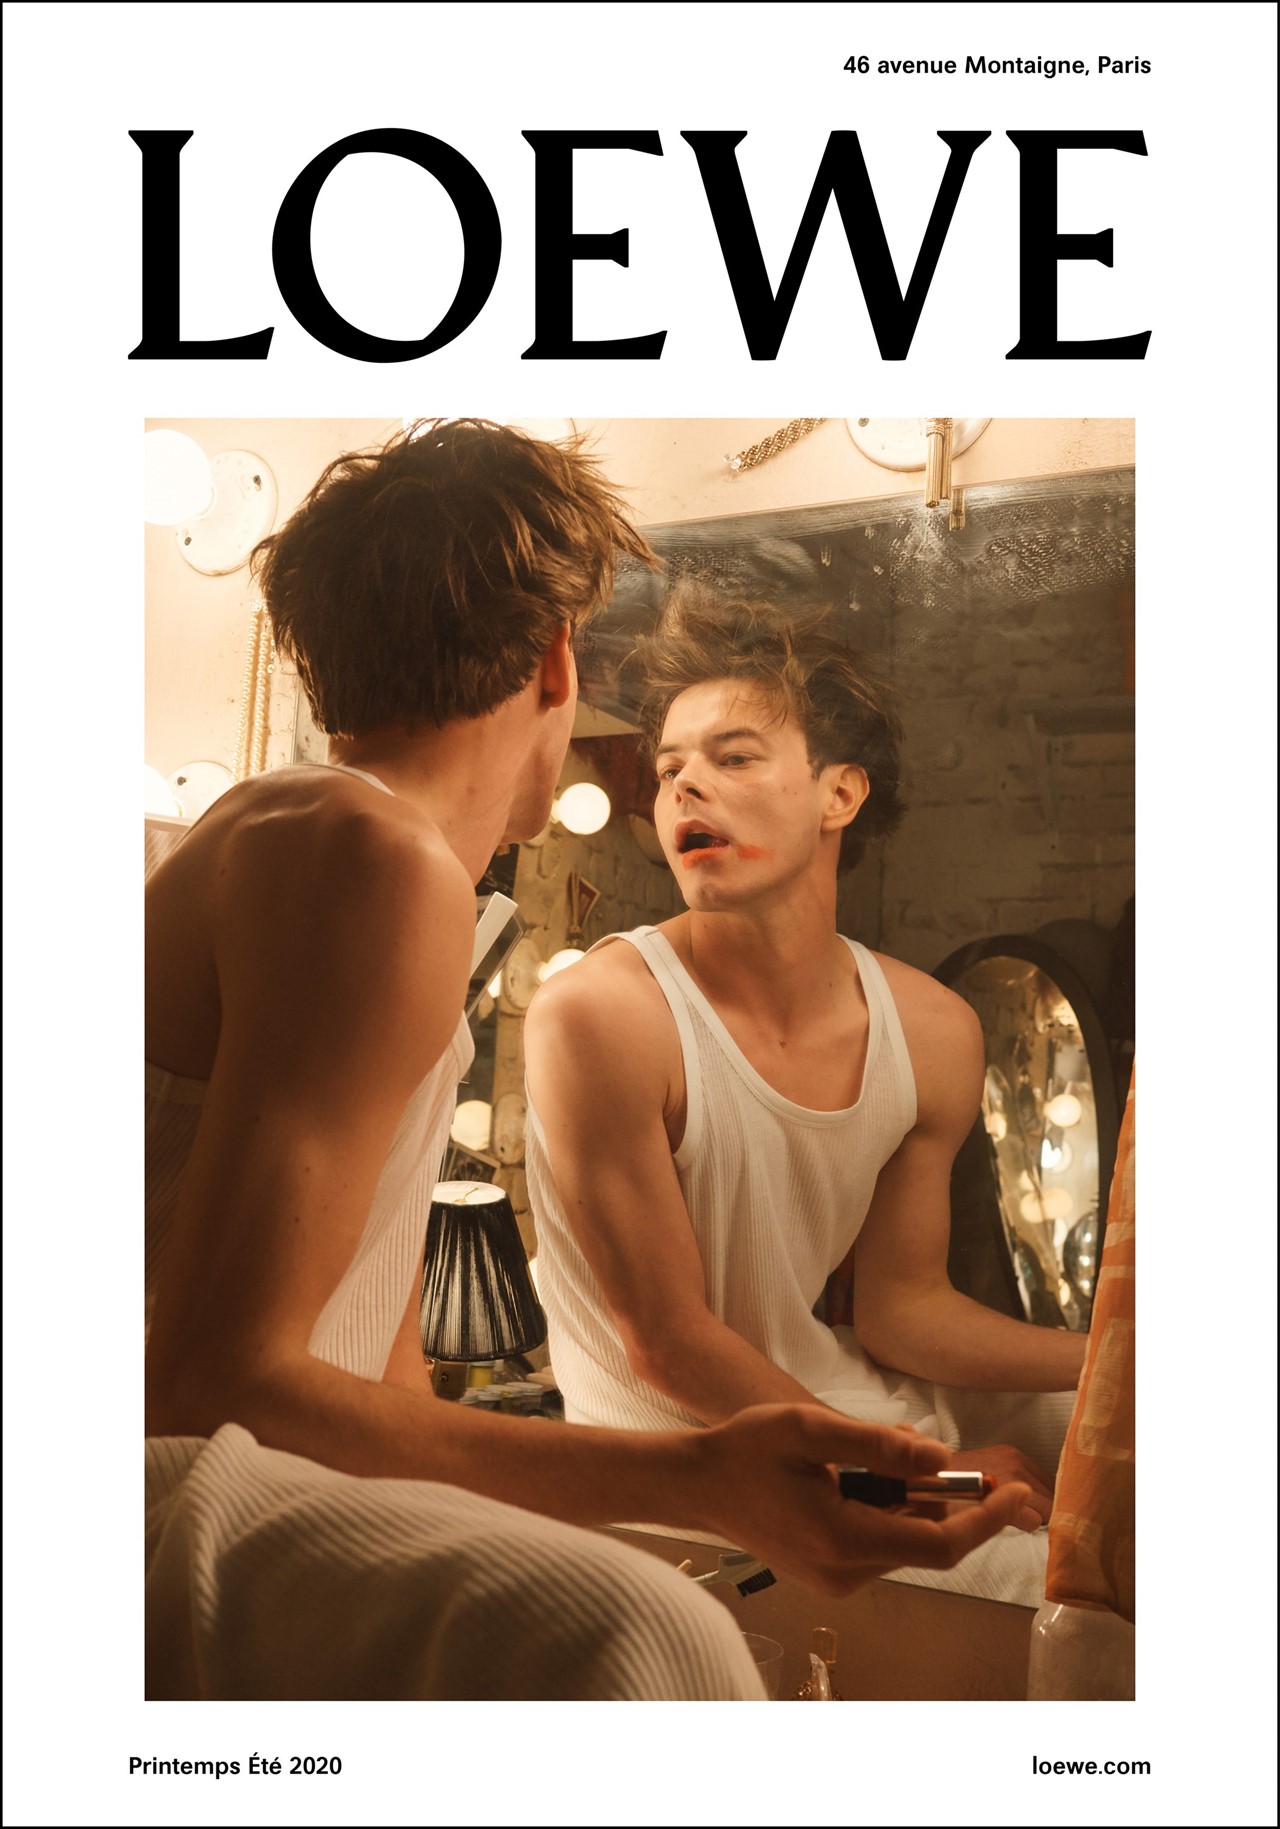 Stranger Things' Charlie Heaton is the star of a new Loewe campaign